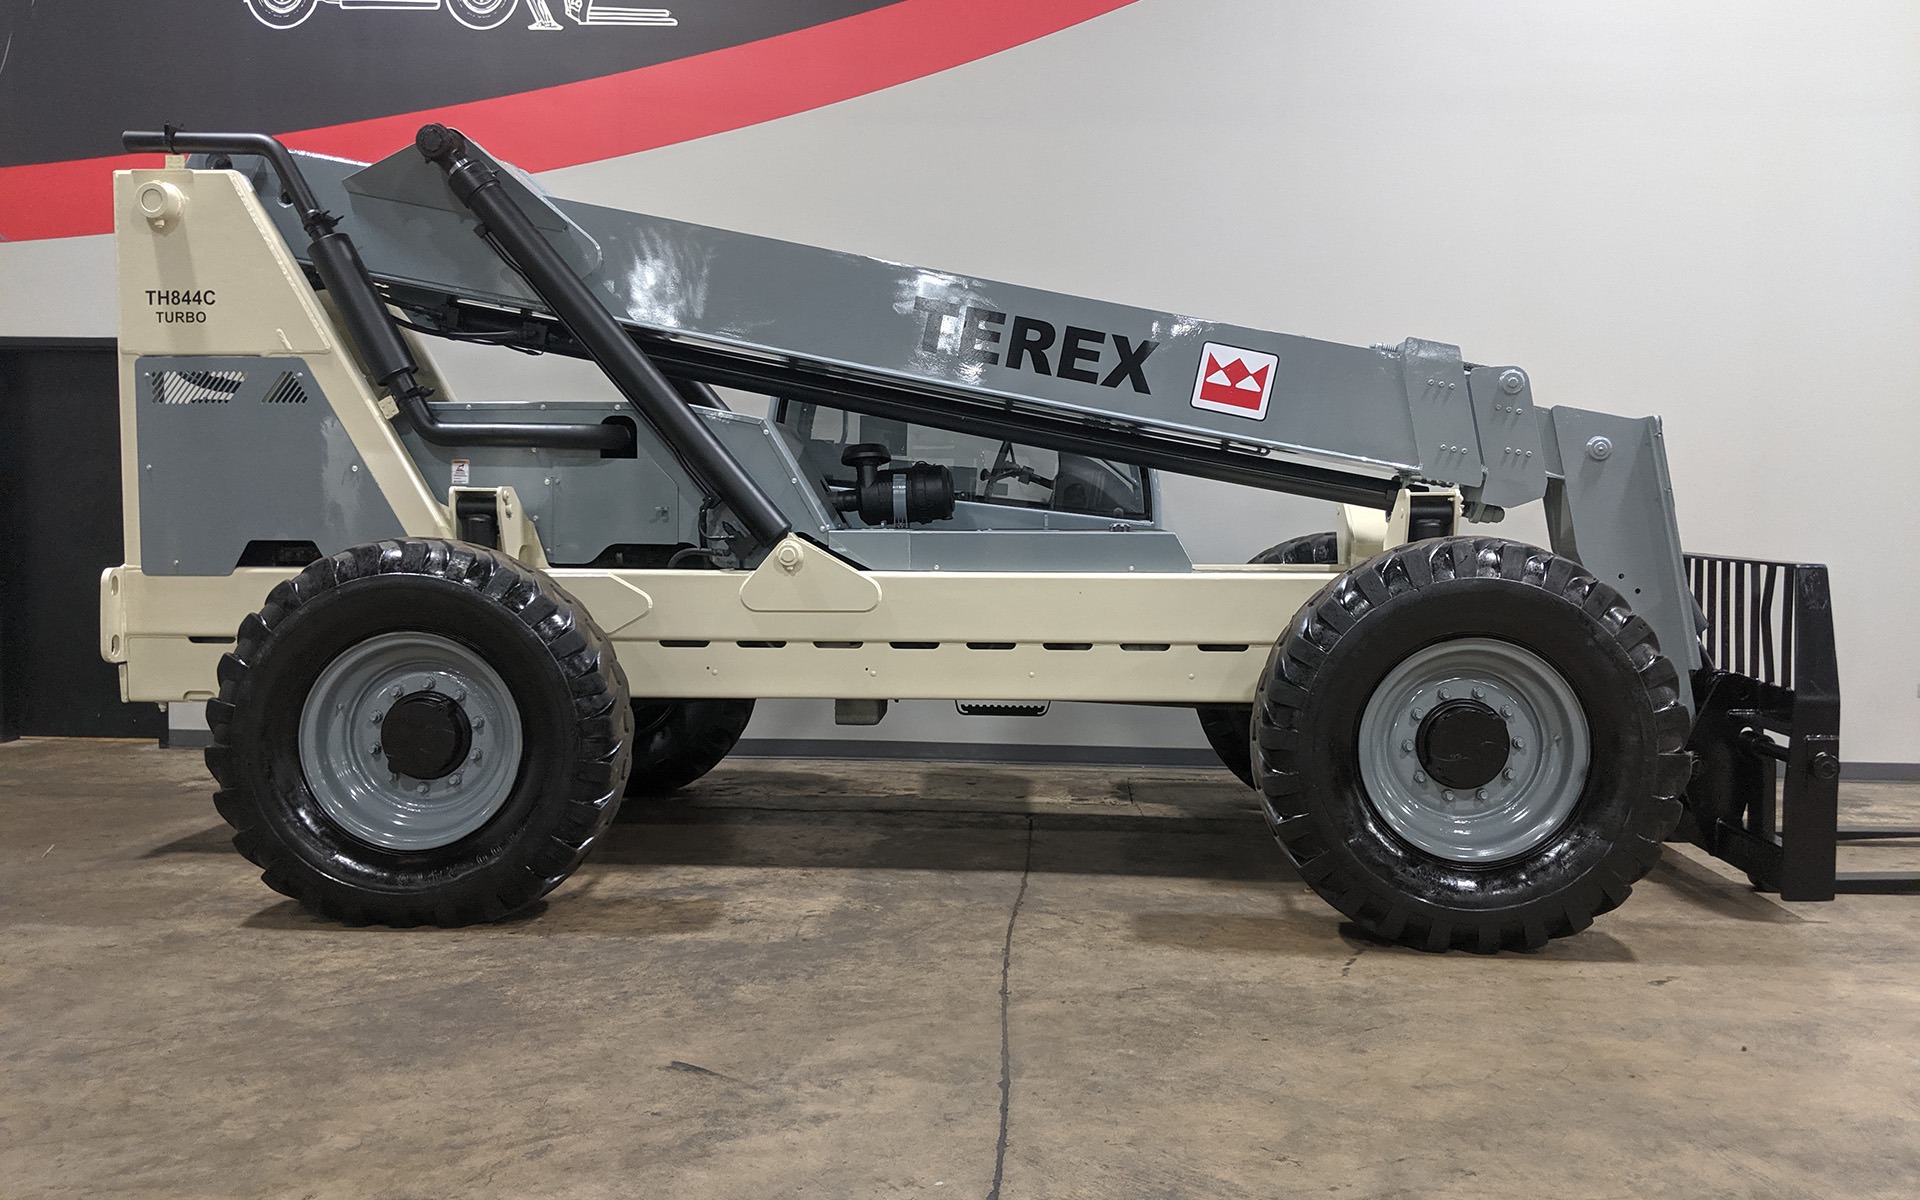 Used 2005 TEREX TH844C  | Cary, IL